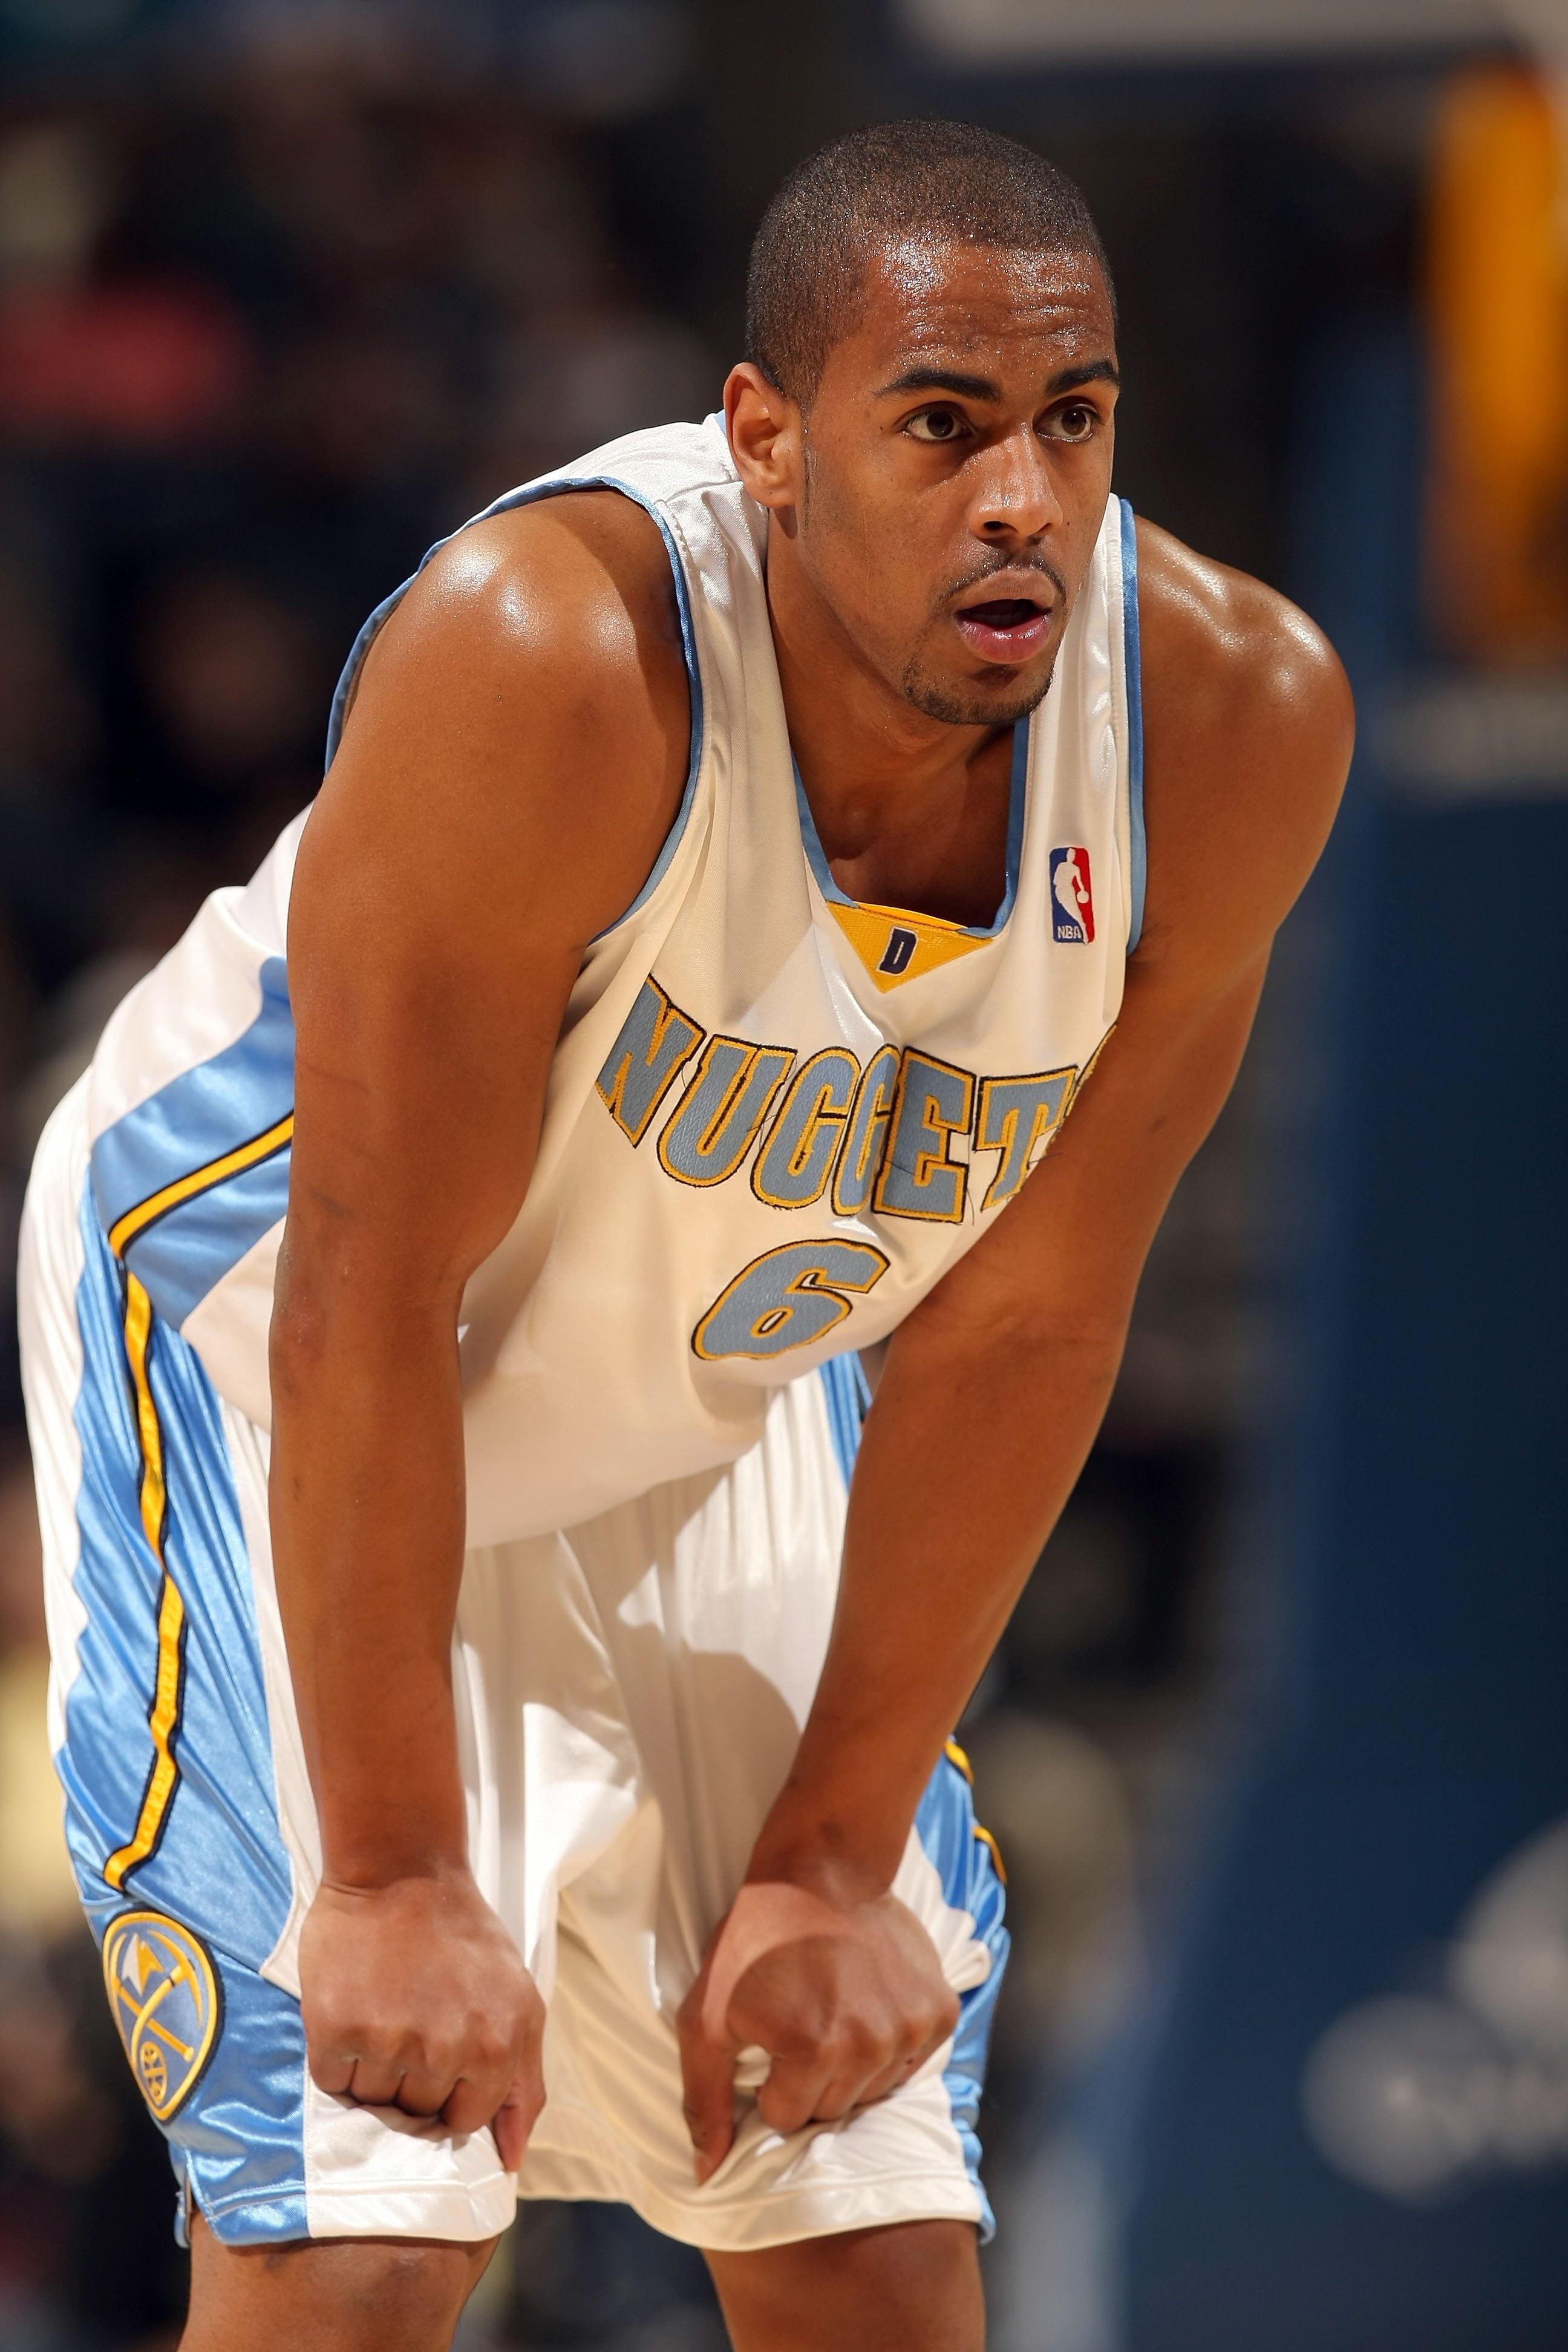 DENVER - JANUARY 05:  Arron Afflalo #6 of the Denver Nuggets looks on during a break in the action against the Golden State Warriors at the Pepsi Center on January 5, 2010 in Denver, Colorado. The Nuggets defeated the Warriors 123-122. NOTE TO USER: User